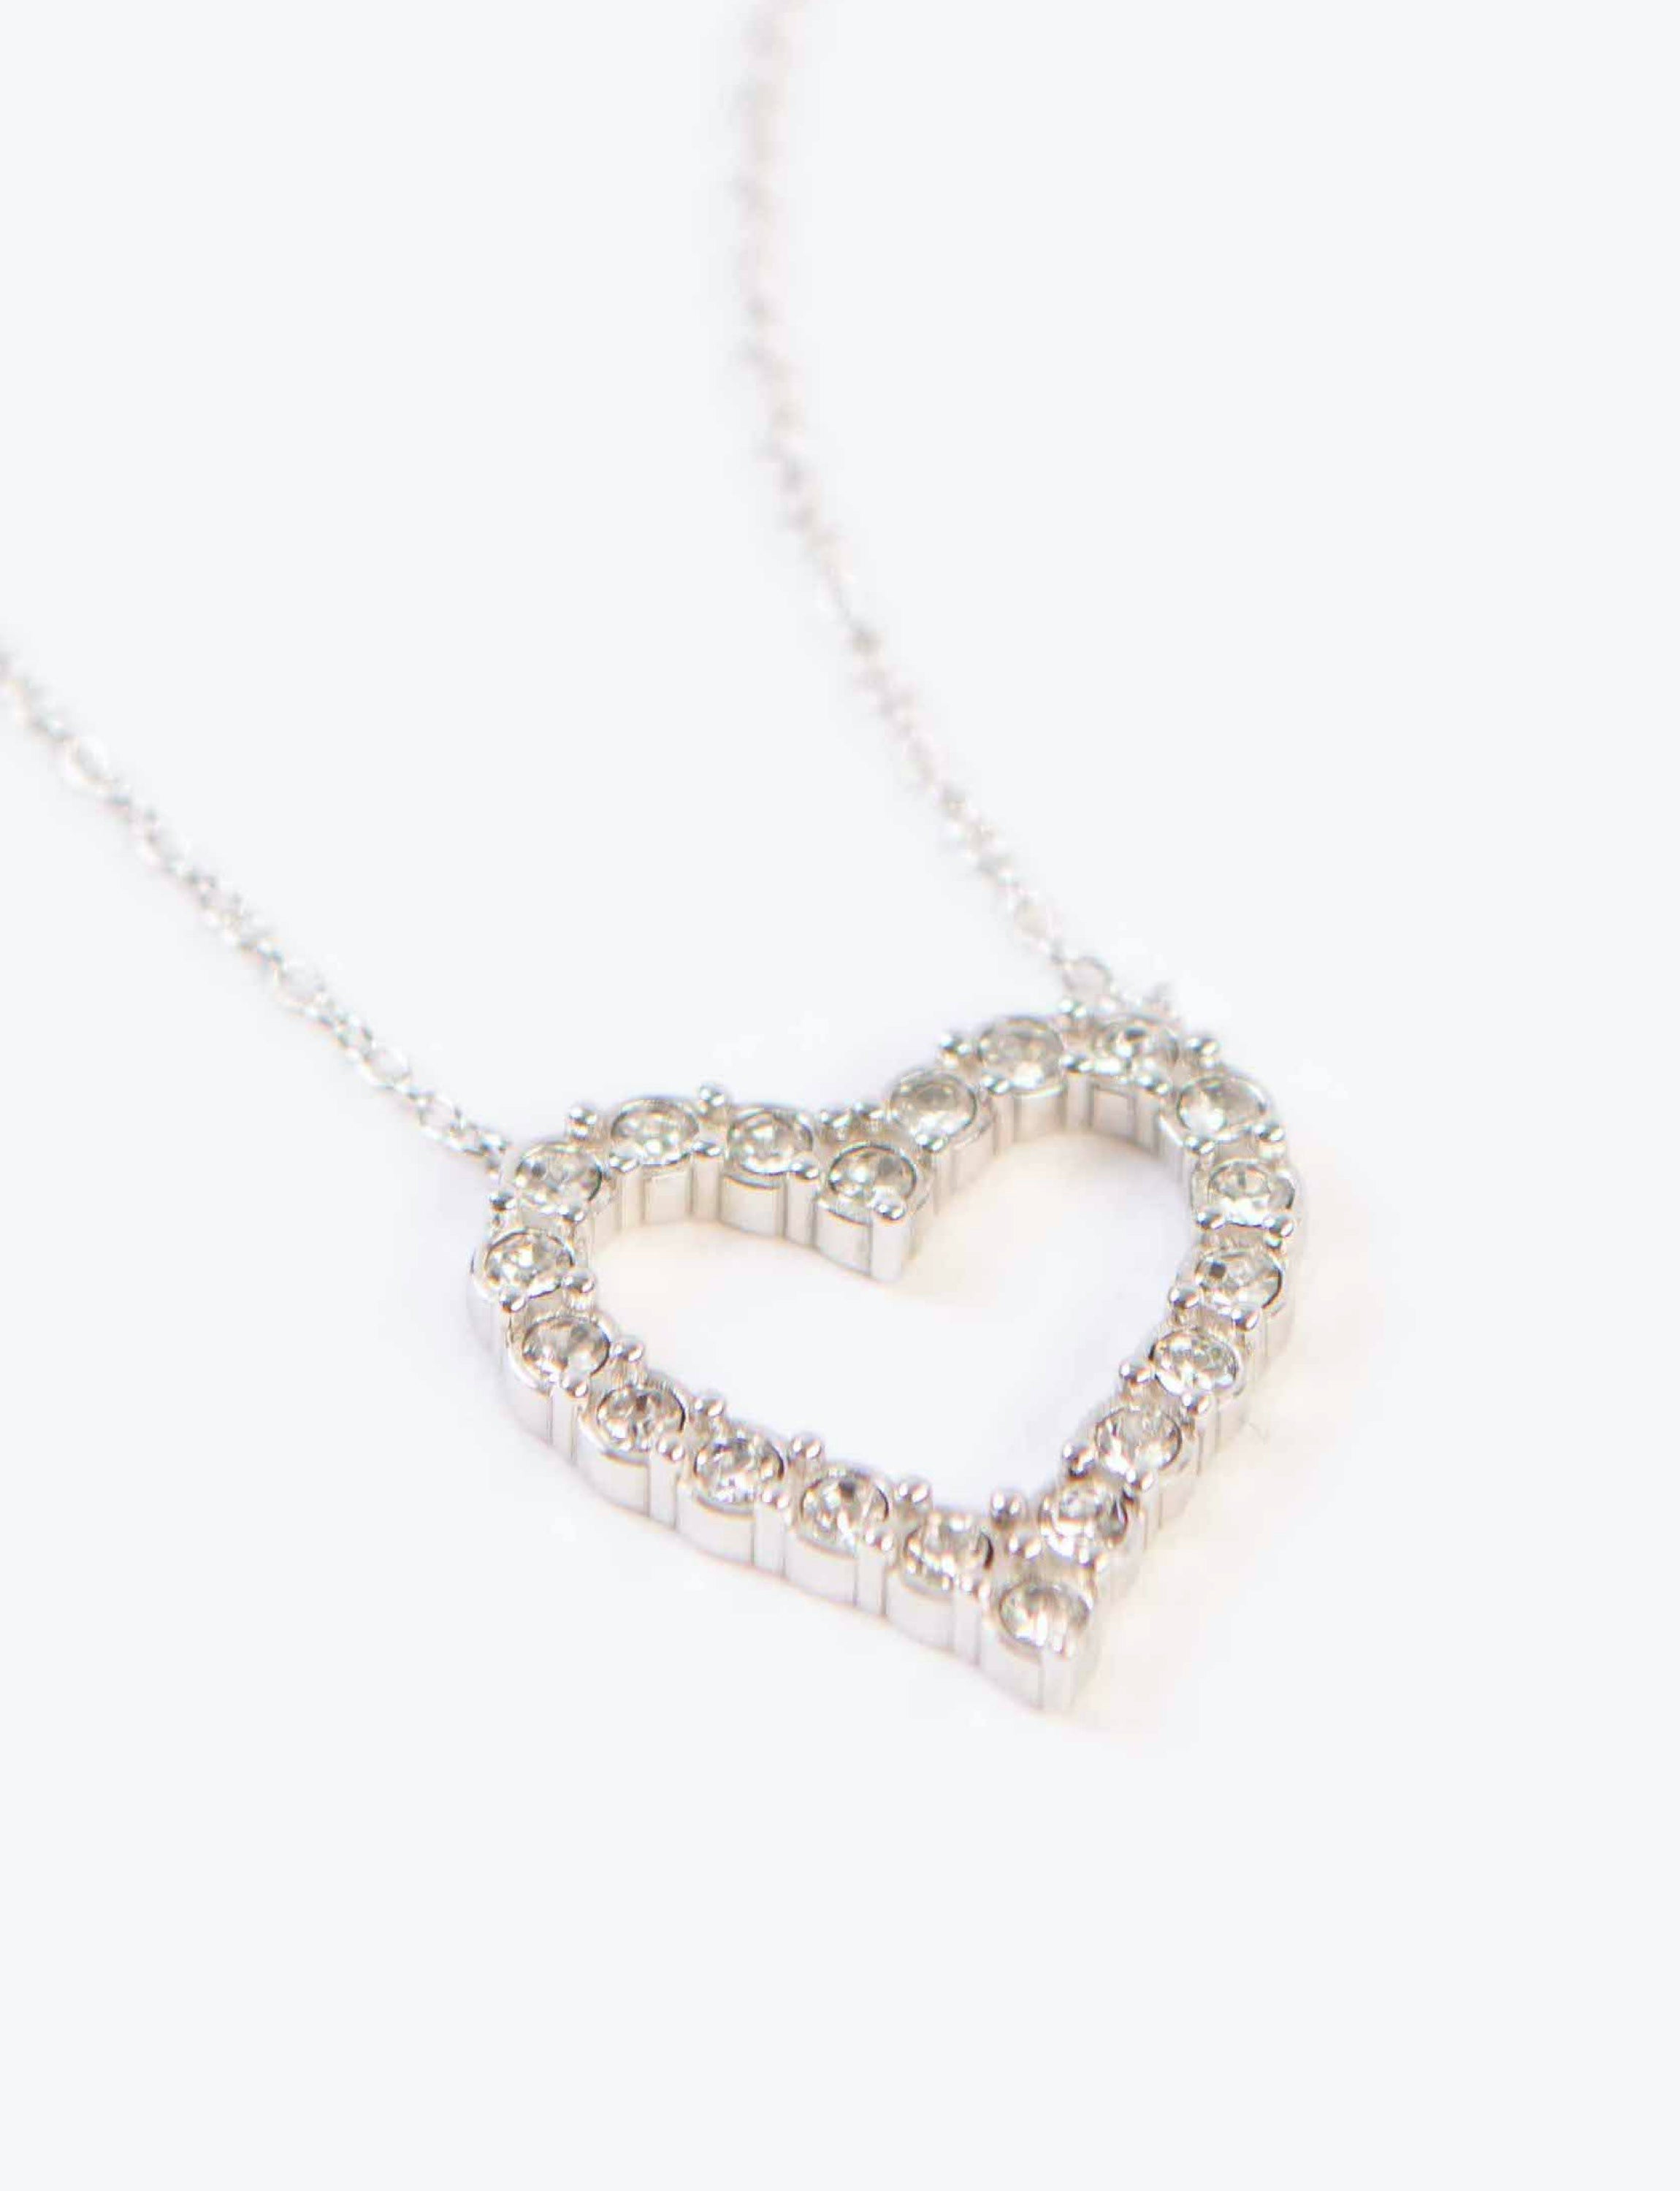 Crystal Stone Silver Heart Necklace